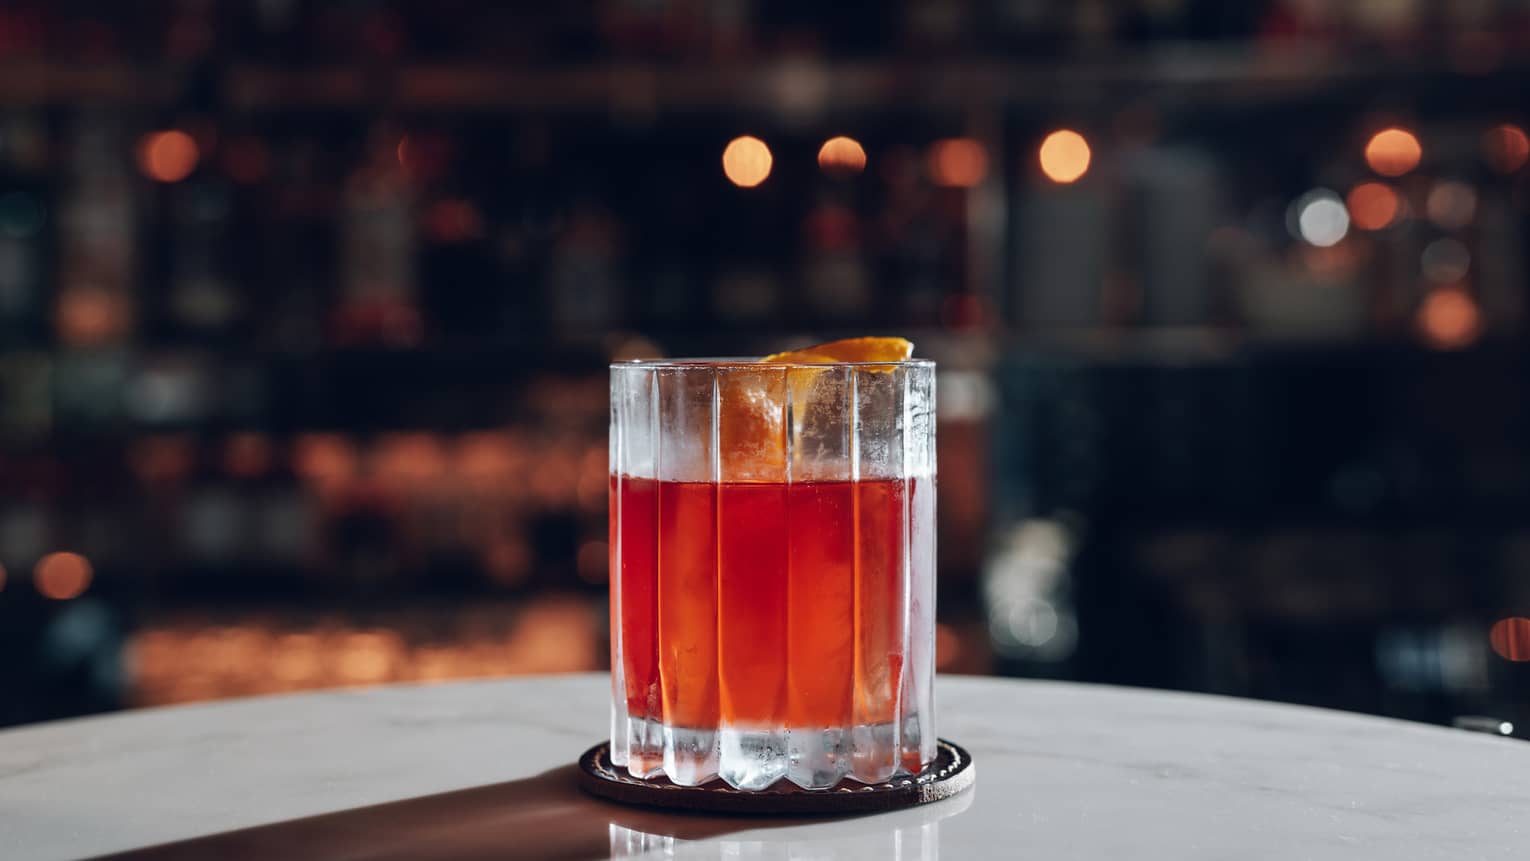 Amber-coloured Negroni cocktail in old fashioned glass with orange peel garnish on marble table